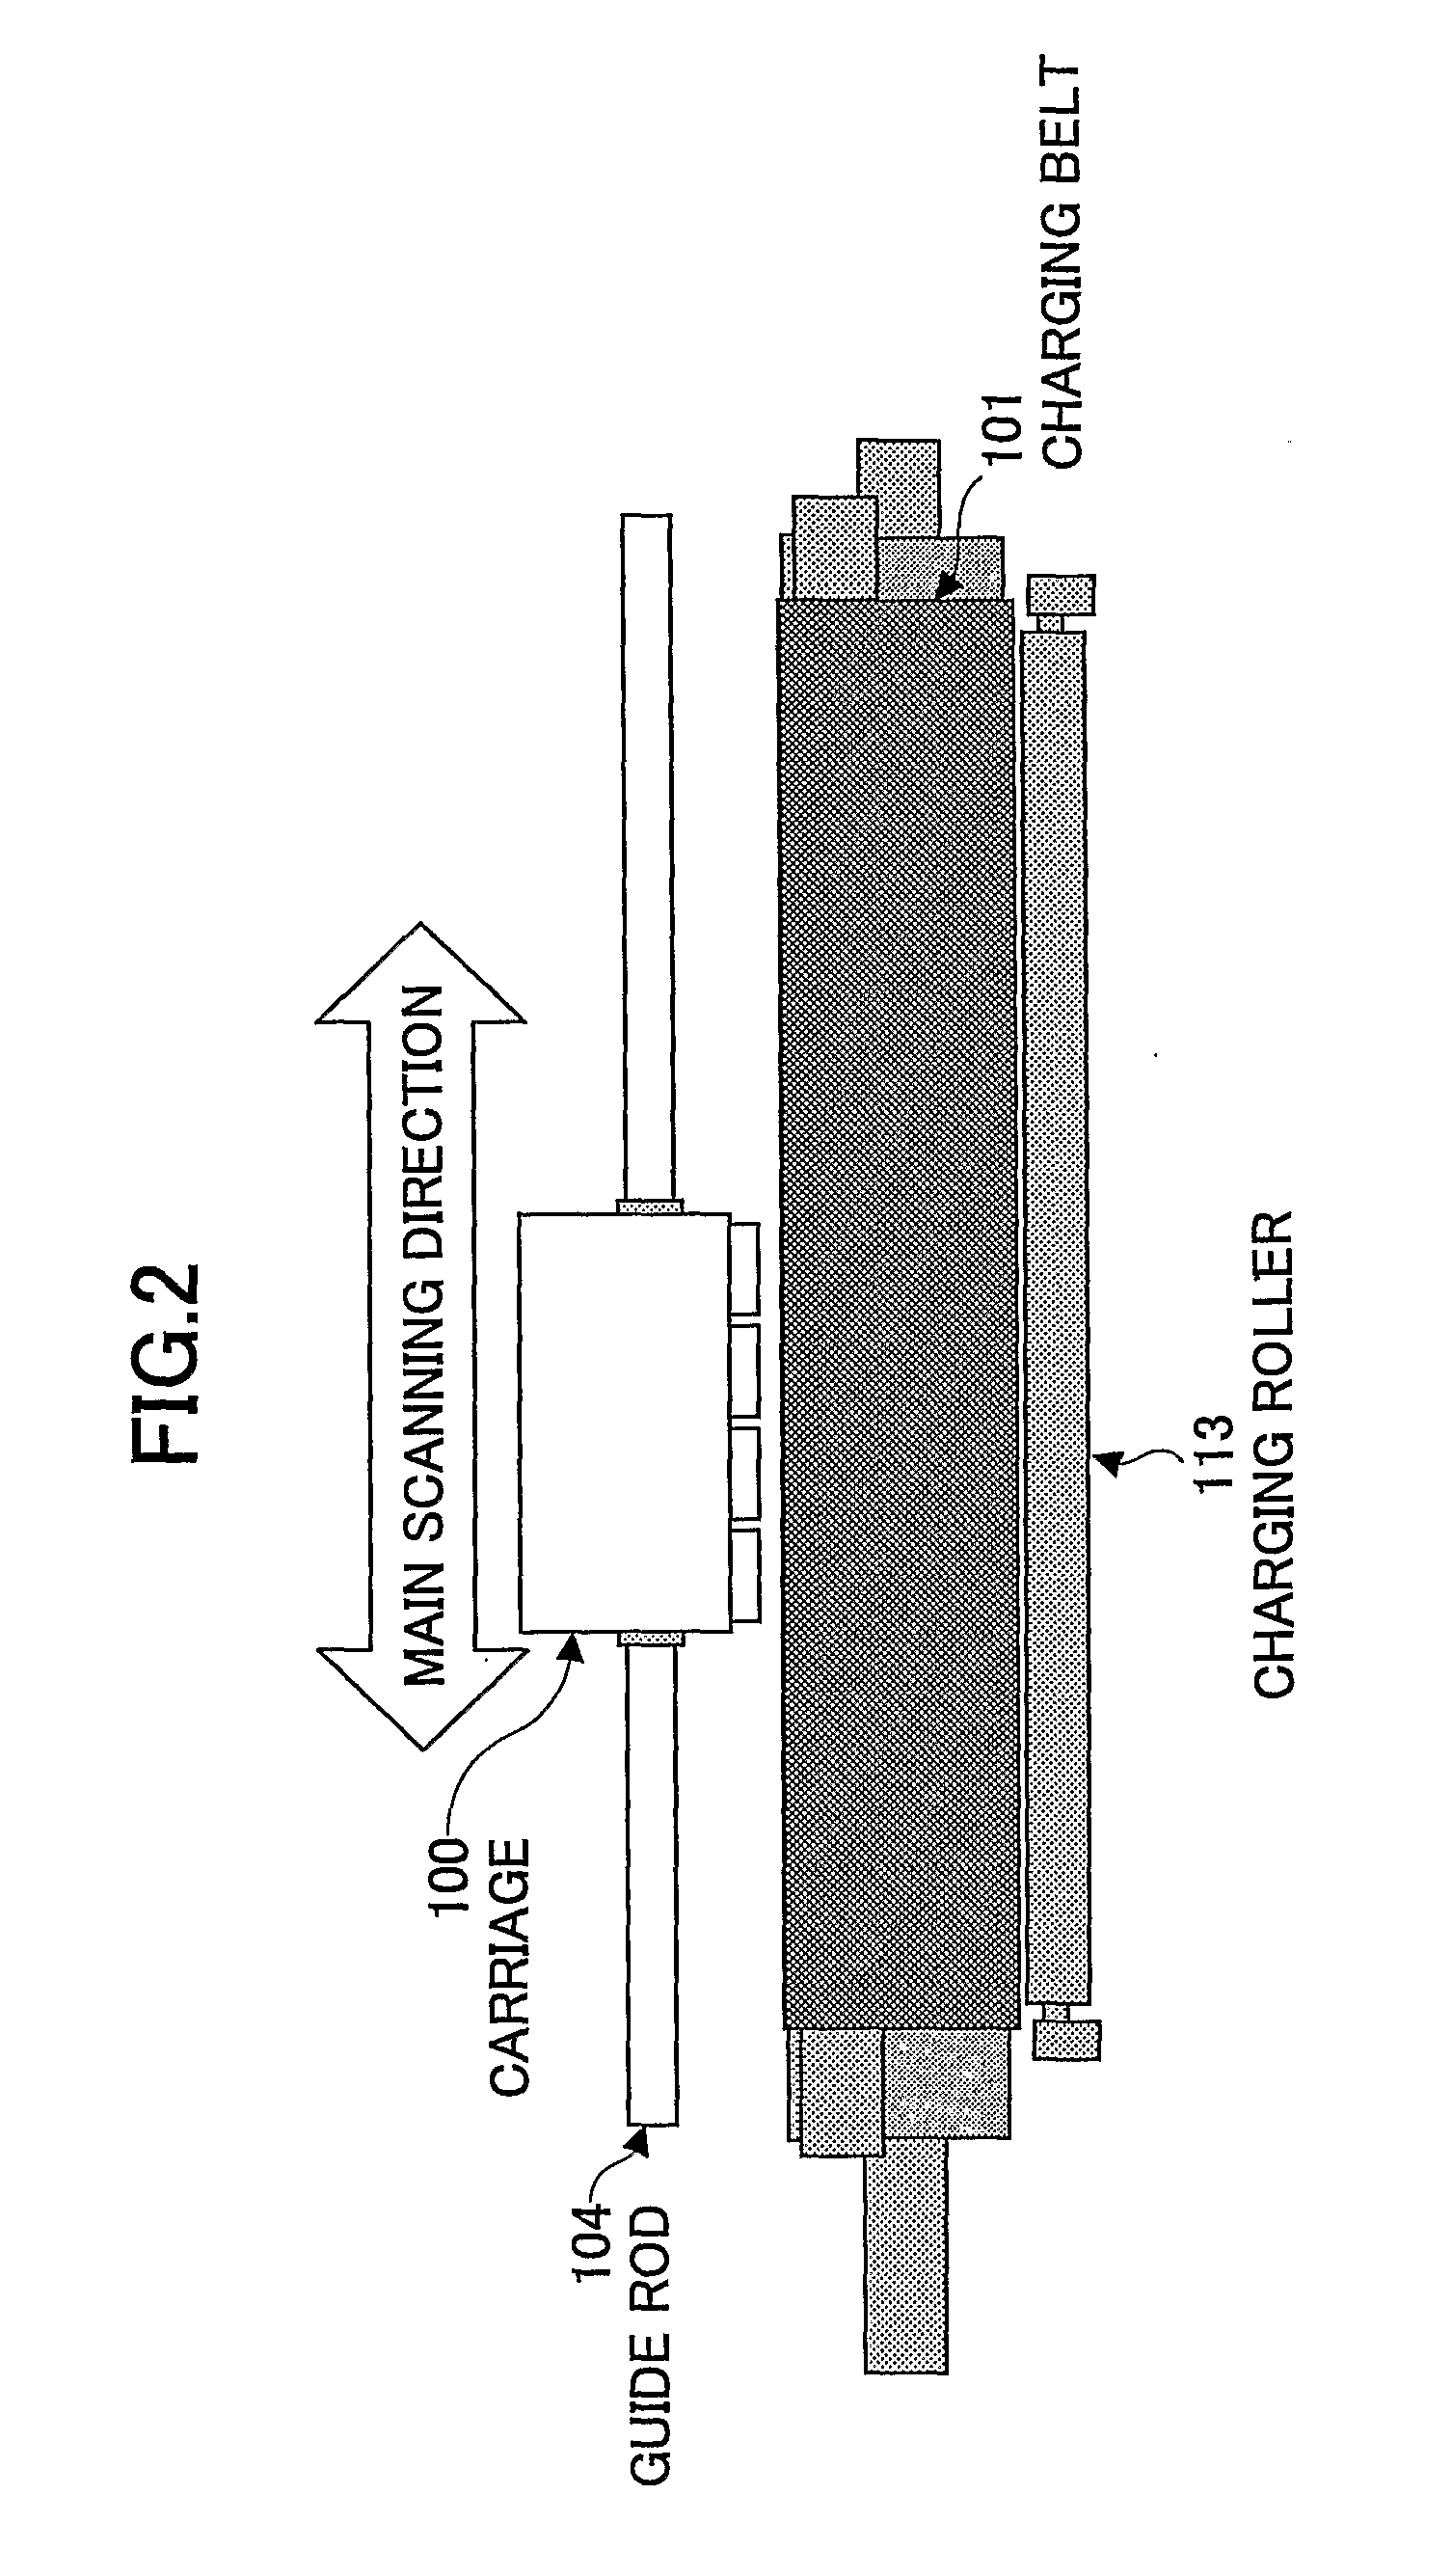 Image forming apparatus, image forming system, image forming method, control program for eliminating conveyance failure, and information recording medium having recorded thereon control program for eliminating conveyance failure